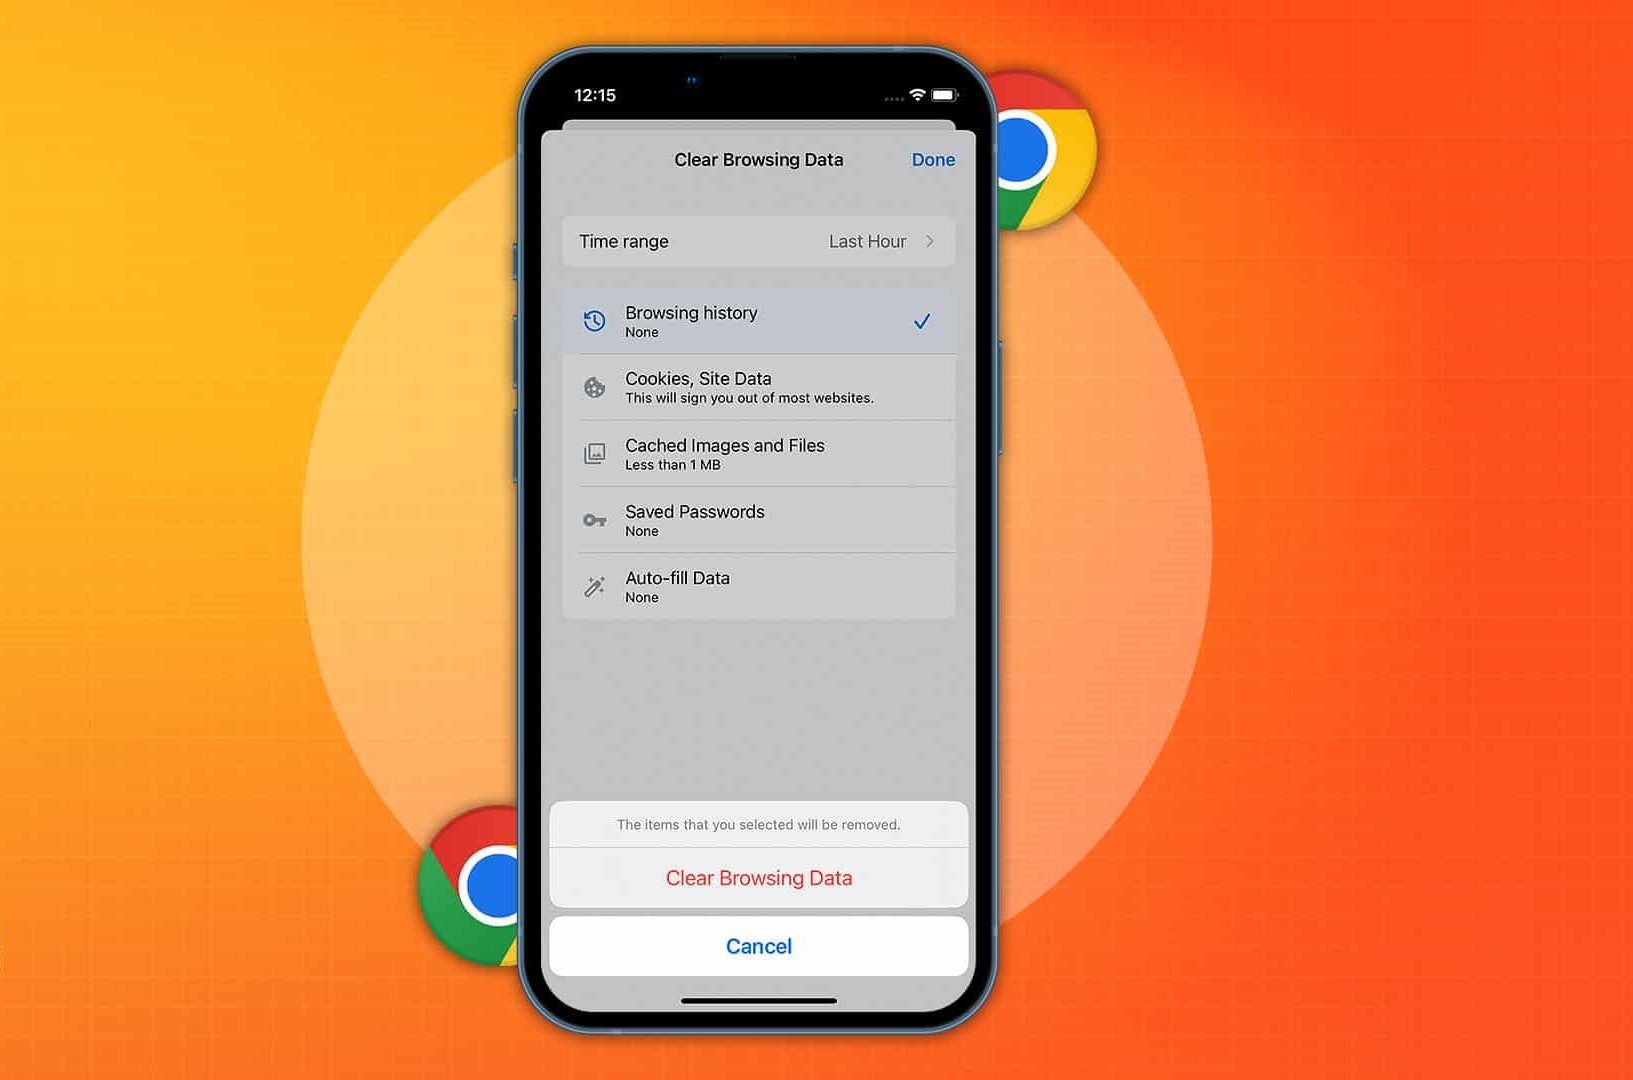 How To Clear Browsing Data In Chrome For iPhone Or iPod Touch